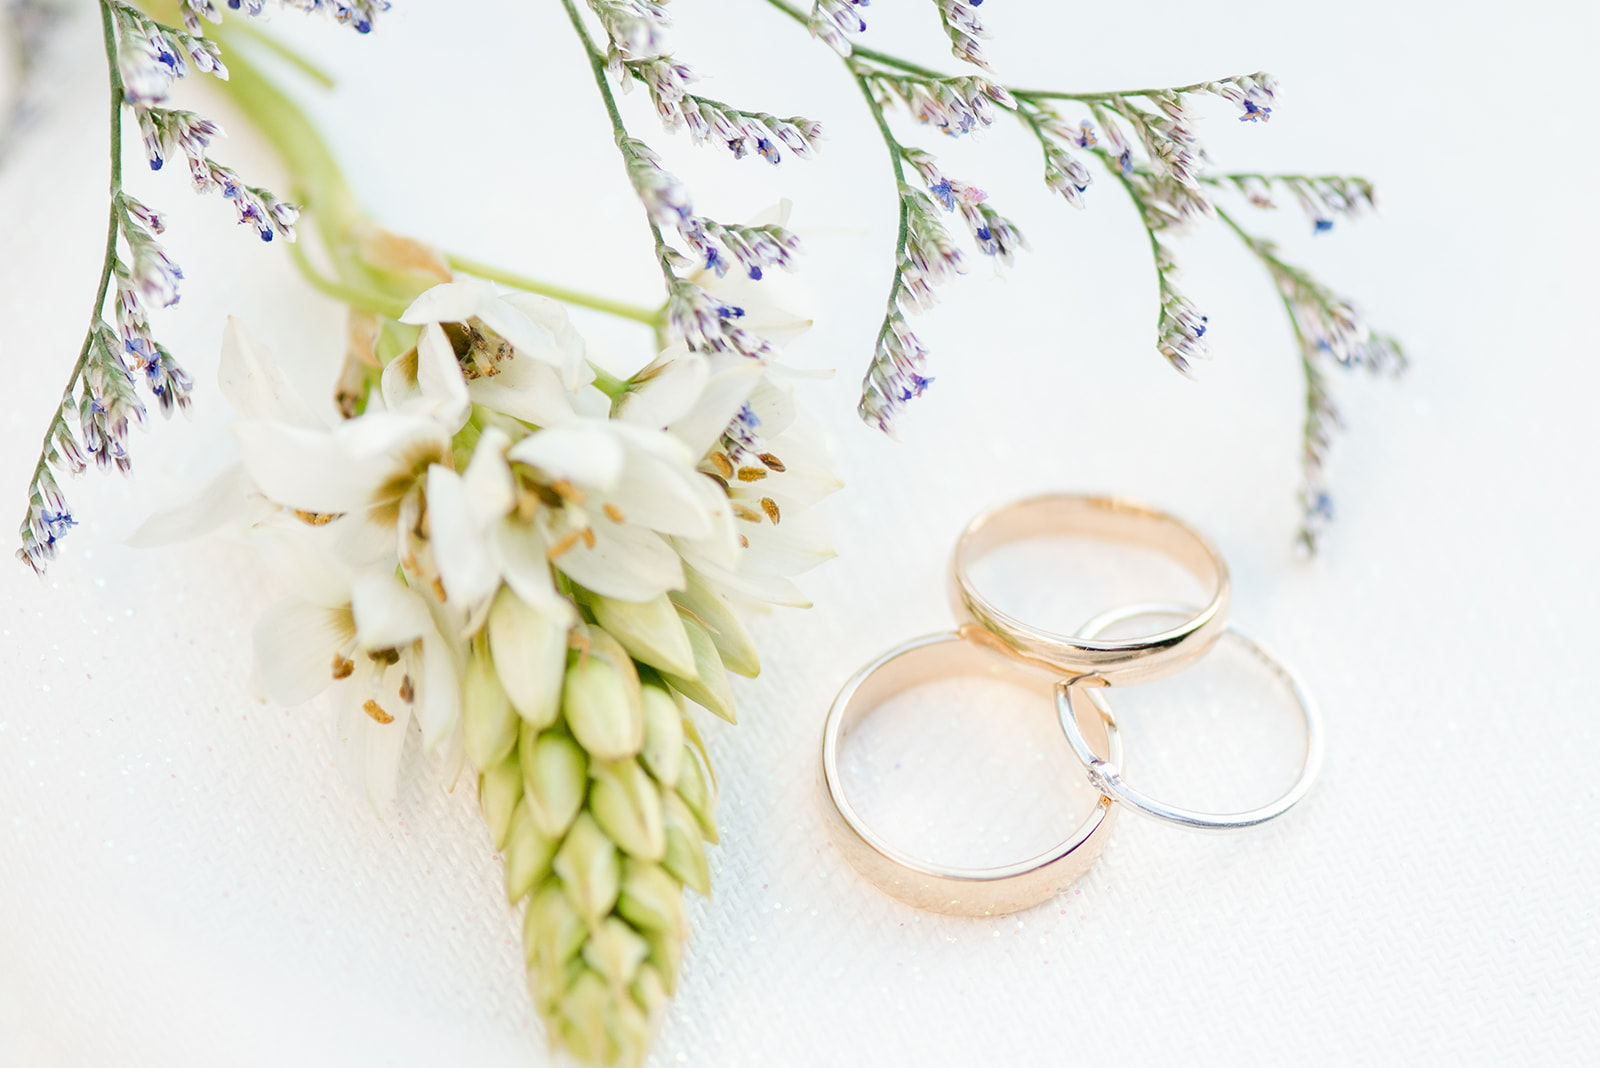 gold wedding rings next to a budding flower stem and lavendar